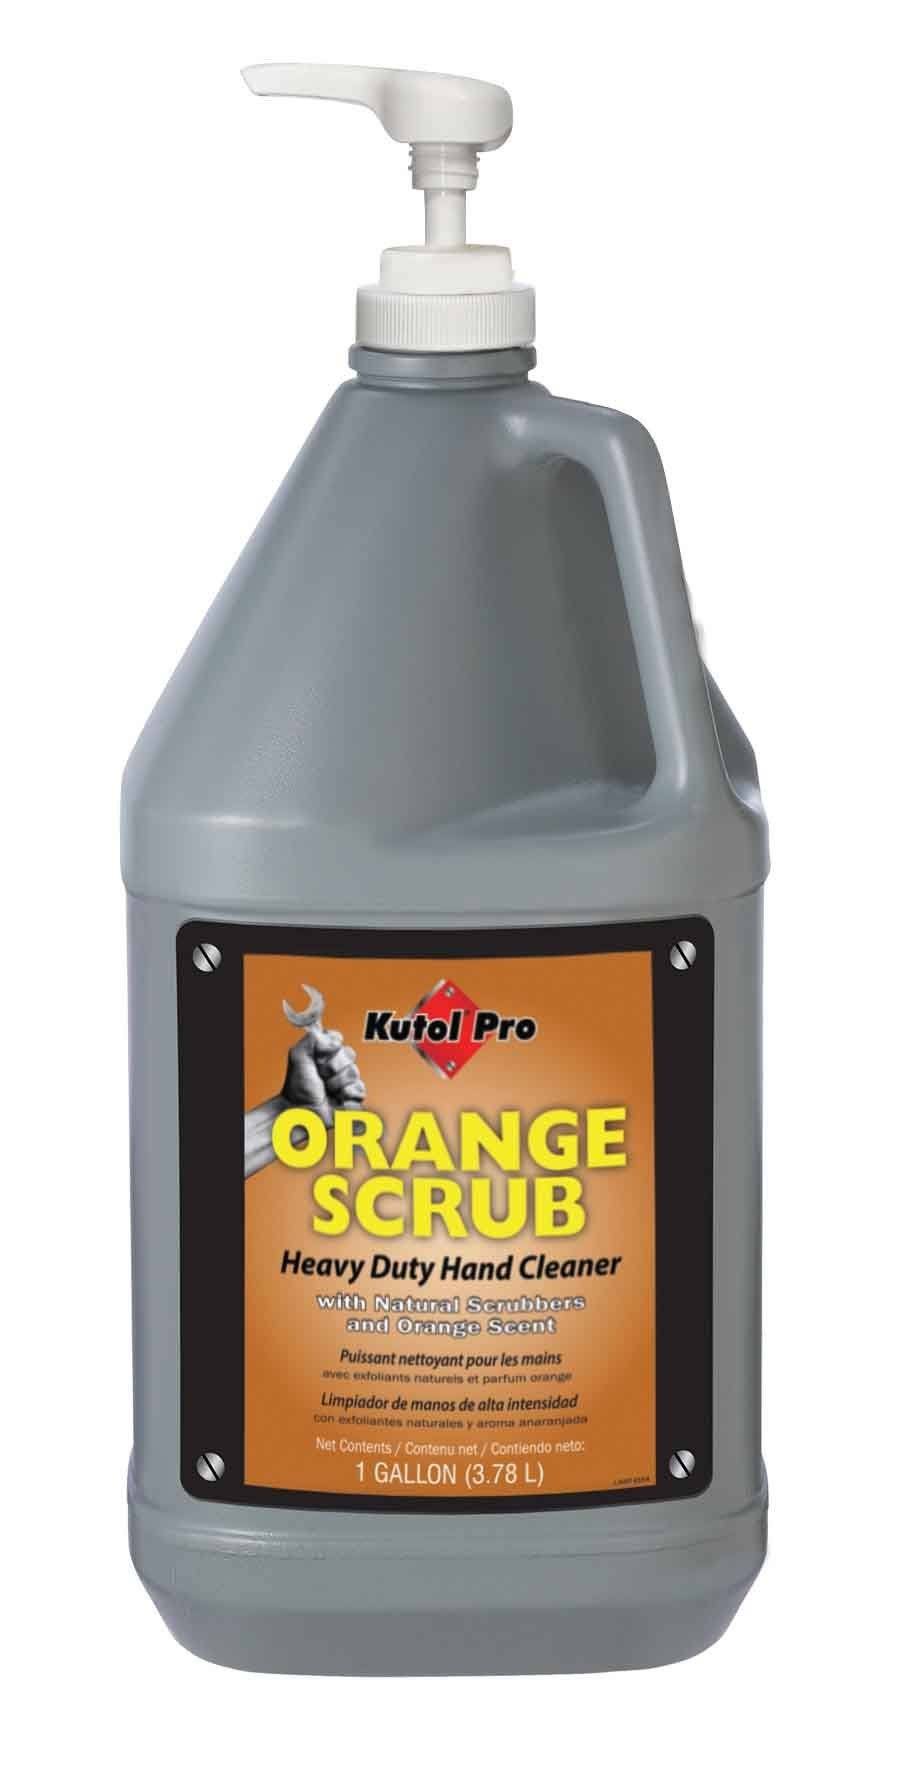 Orange Scrub with Natural Scrubbers Heavy Duty Hand Cleaner, One Gallon Bottle with Pump, Kutol Pro 4902, Pack of 1